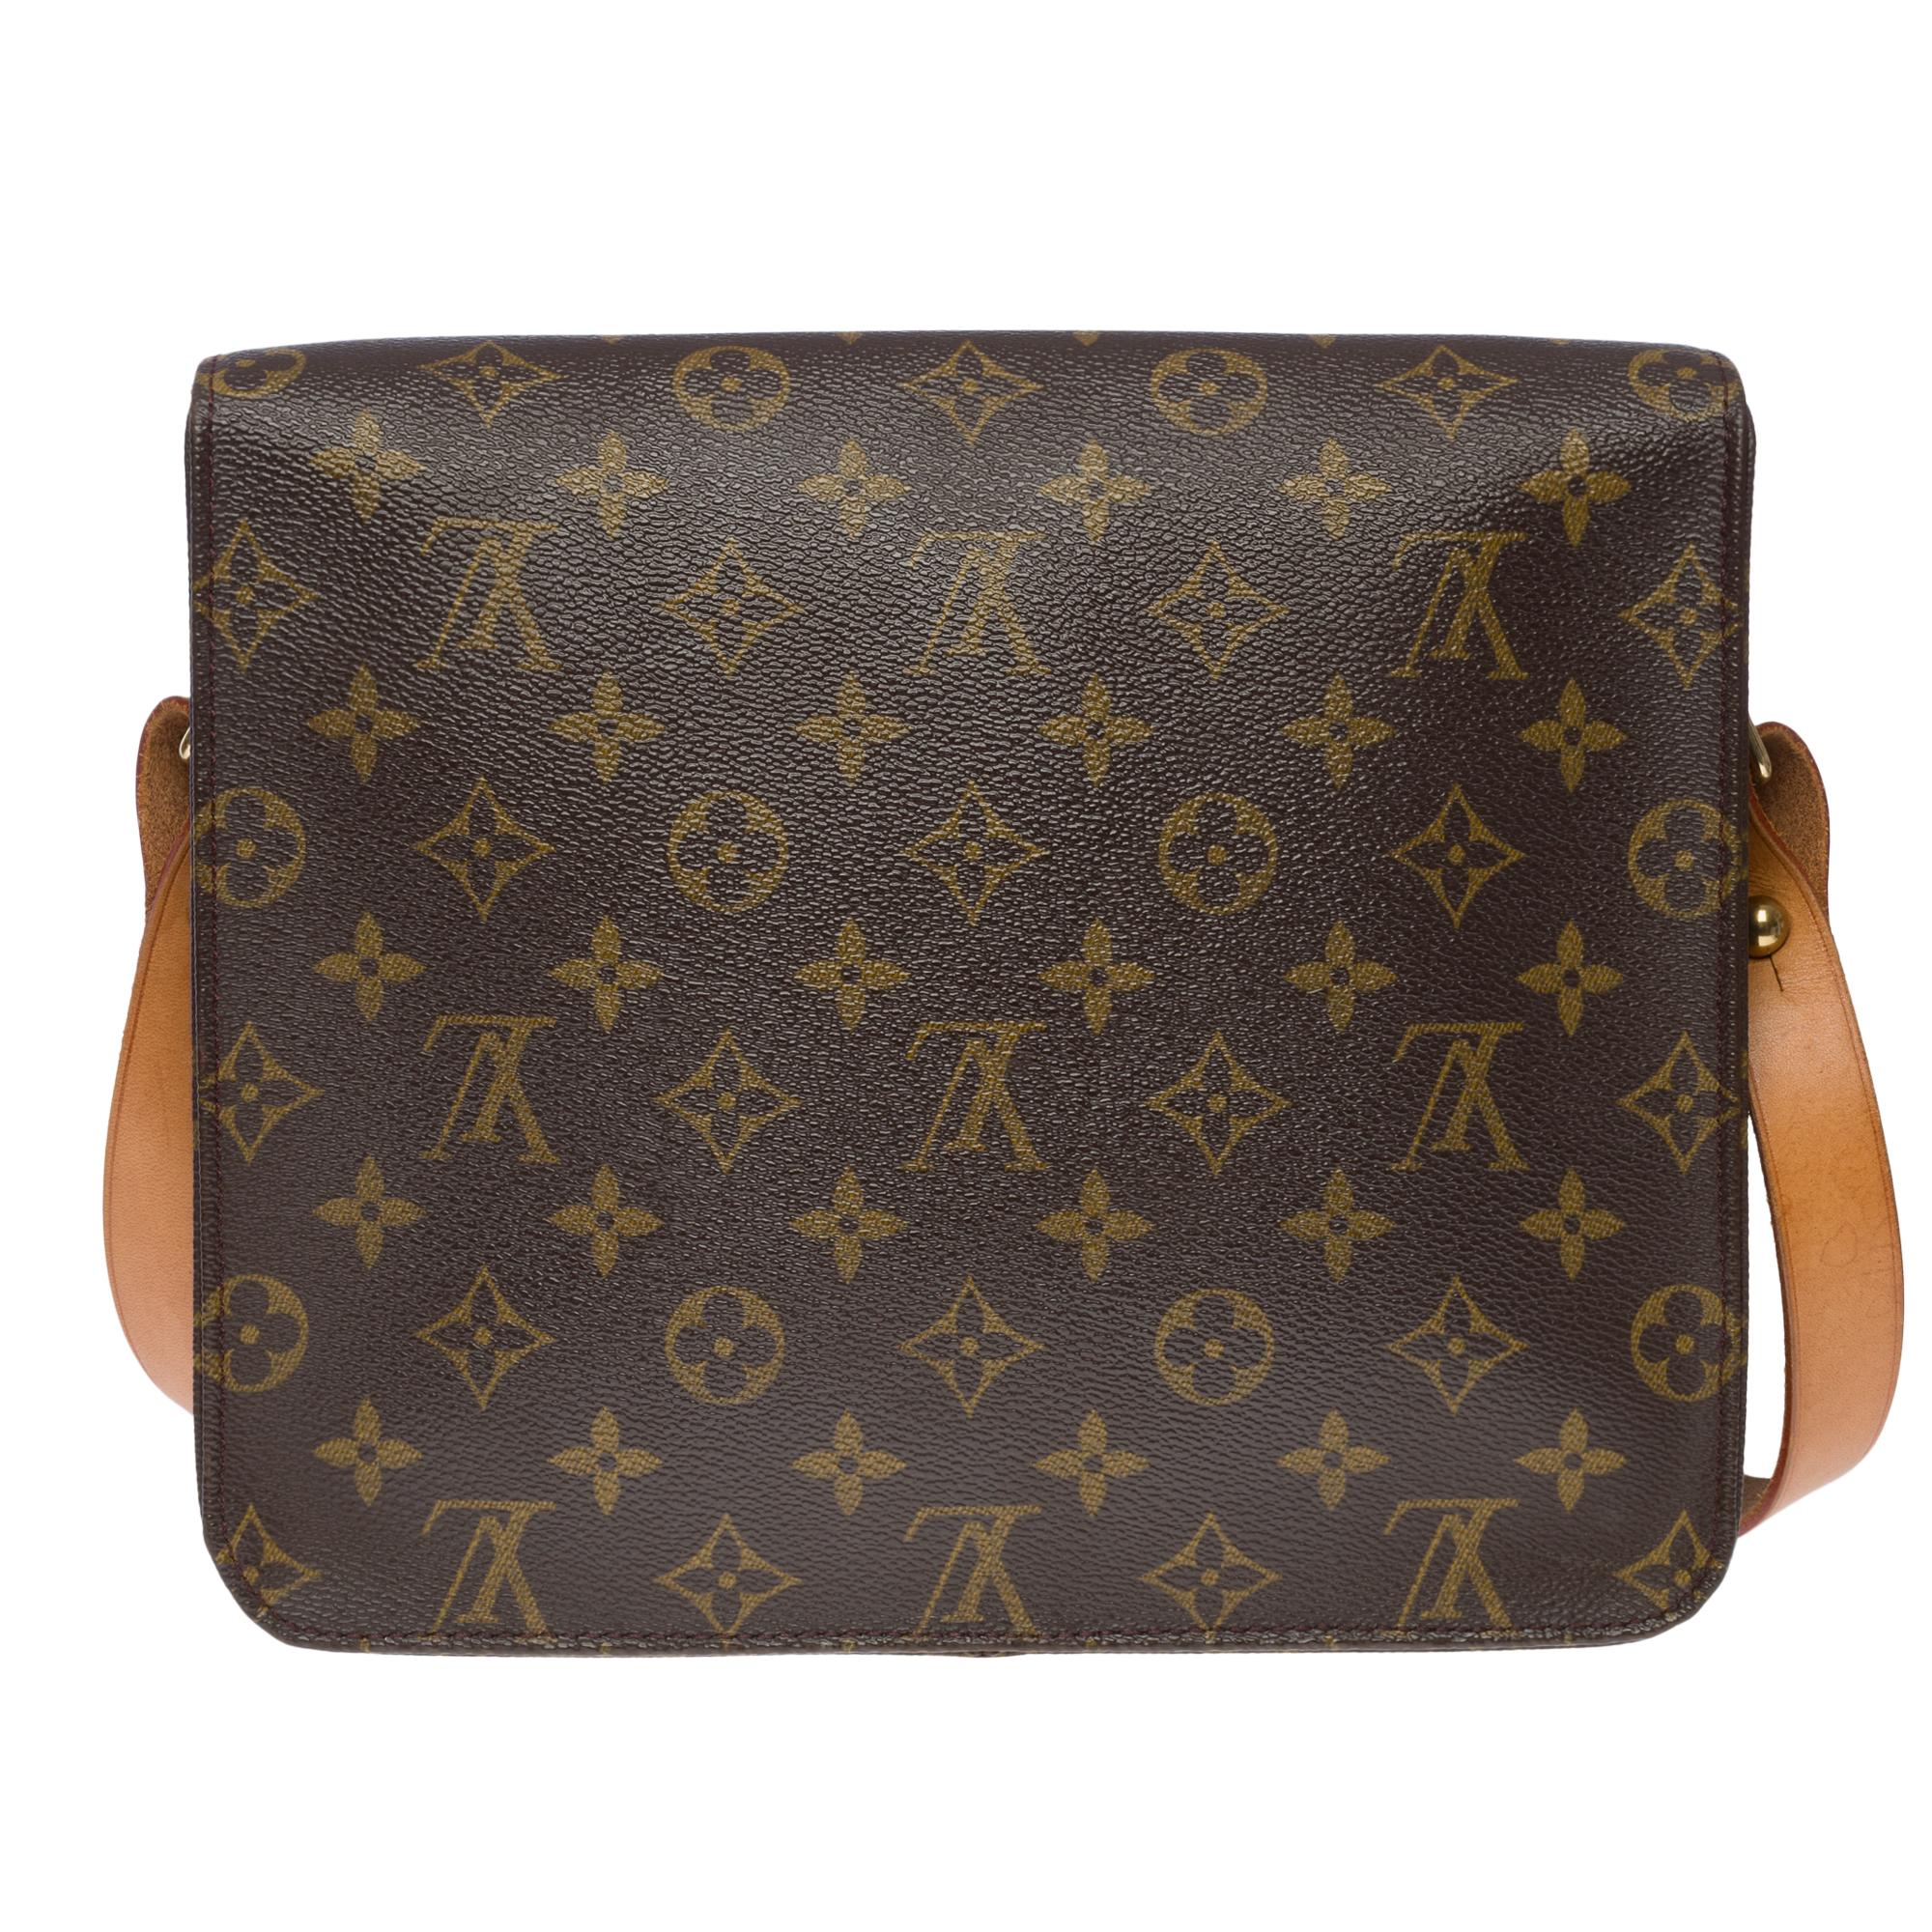 The essential Louis Vuitton Cartouchière GM shoulder bag in brown monogram canvas and natural leather, gold metal hardware, an adjustable shoulder strap in natural leather for a shoulder or crossbody carry

Pin buckle closure on flap
Brown leather